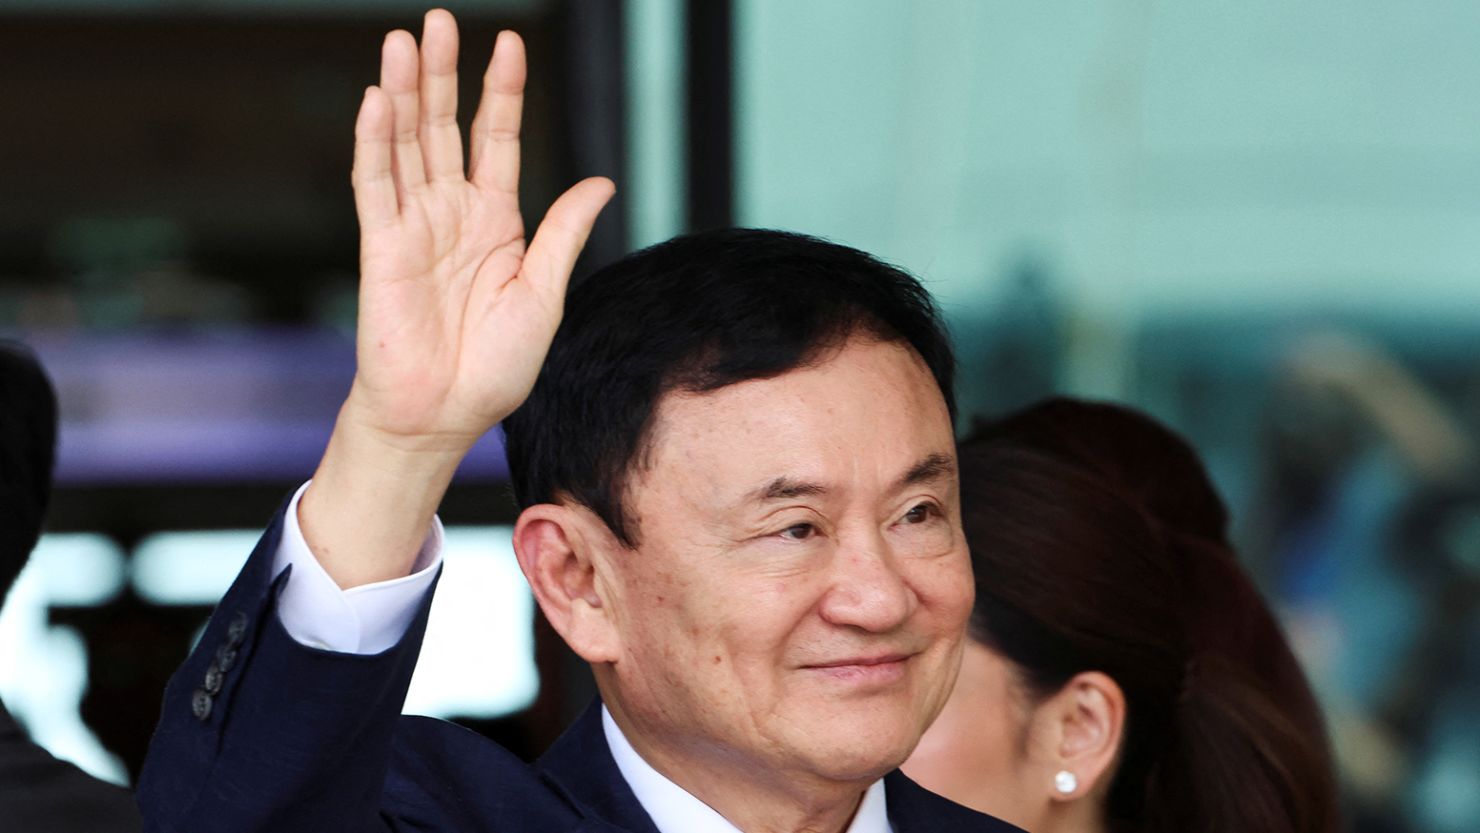 Former Thai Prime Minister Thaksin Shinawatra upon his return as he ends almost two decades of self-imposed exile, at Don Mueang airport in Bangkok, Thailand on August 22.